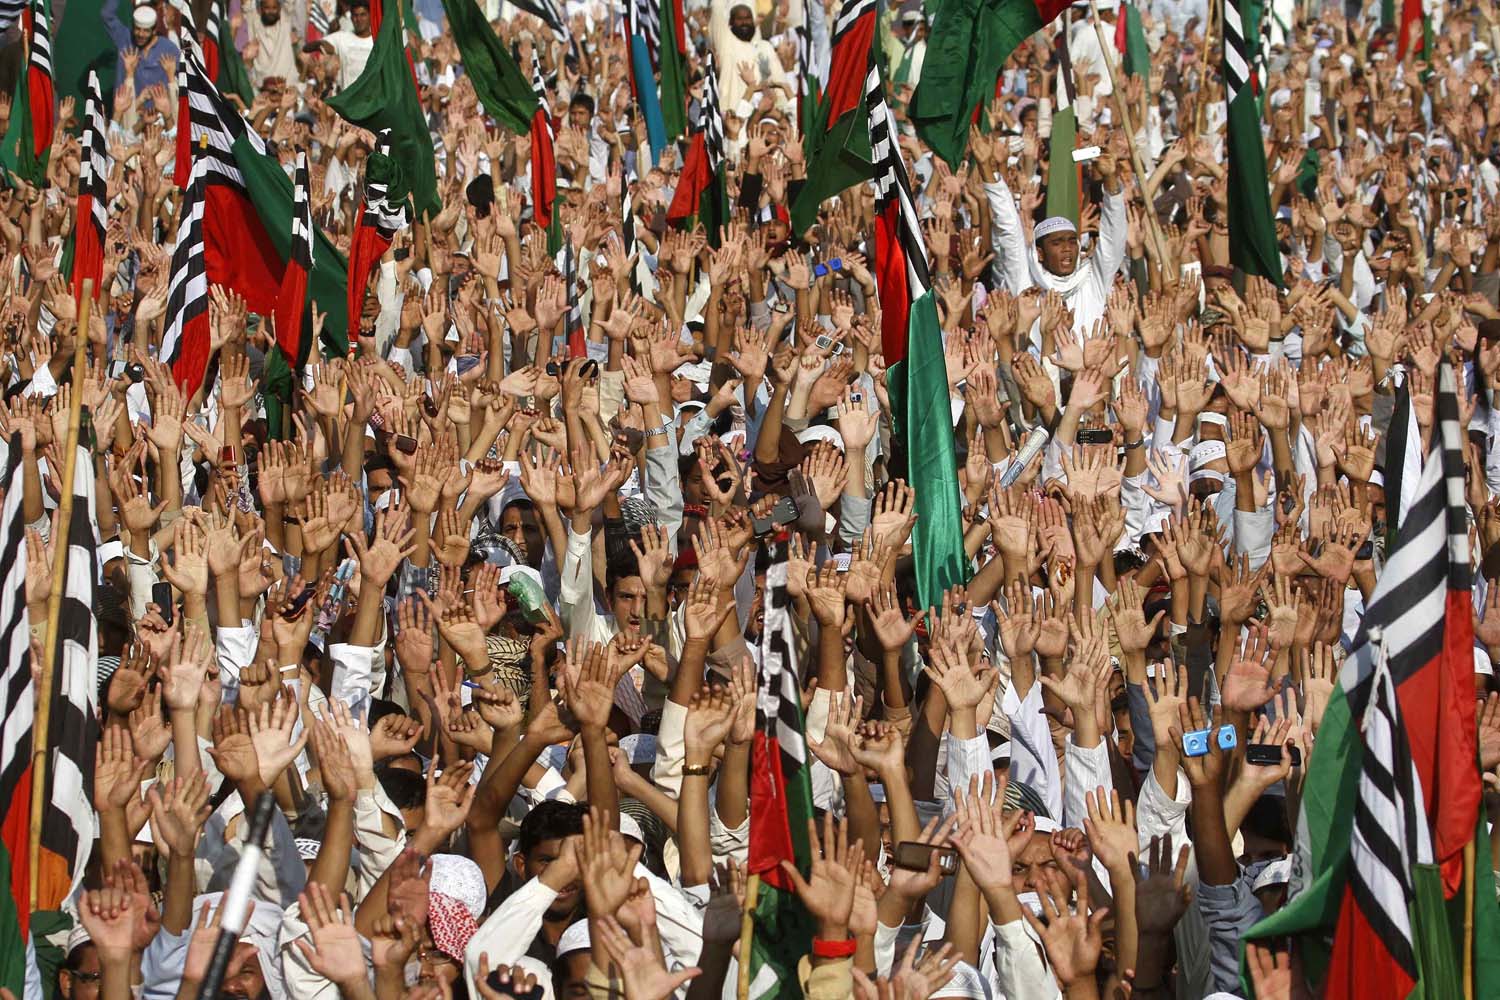 Nov. 22, 2013. Supporters of Ahl-i-Sunnat Wal Jamaat (ASWJ), a political and religious group, raise their hands during a protest in Karachi, Pakistan.